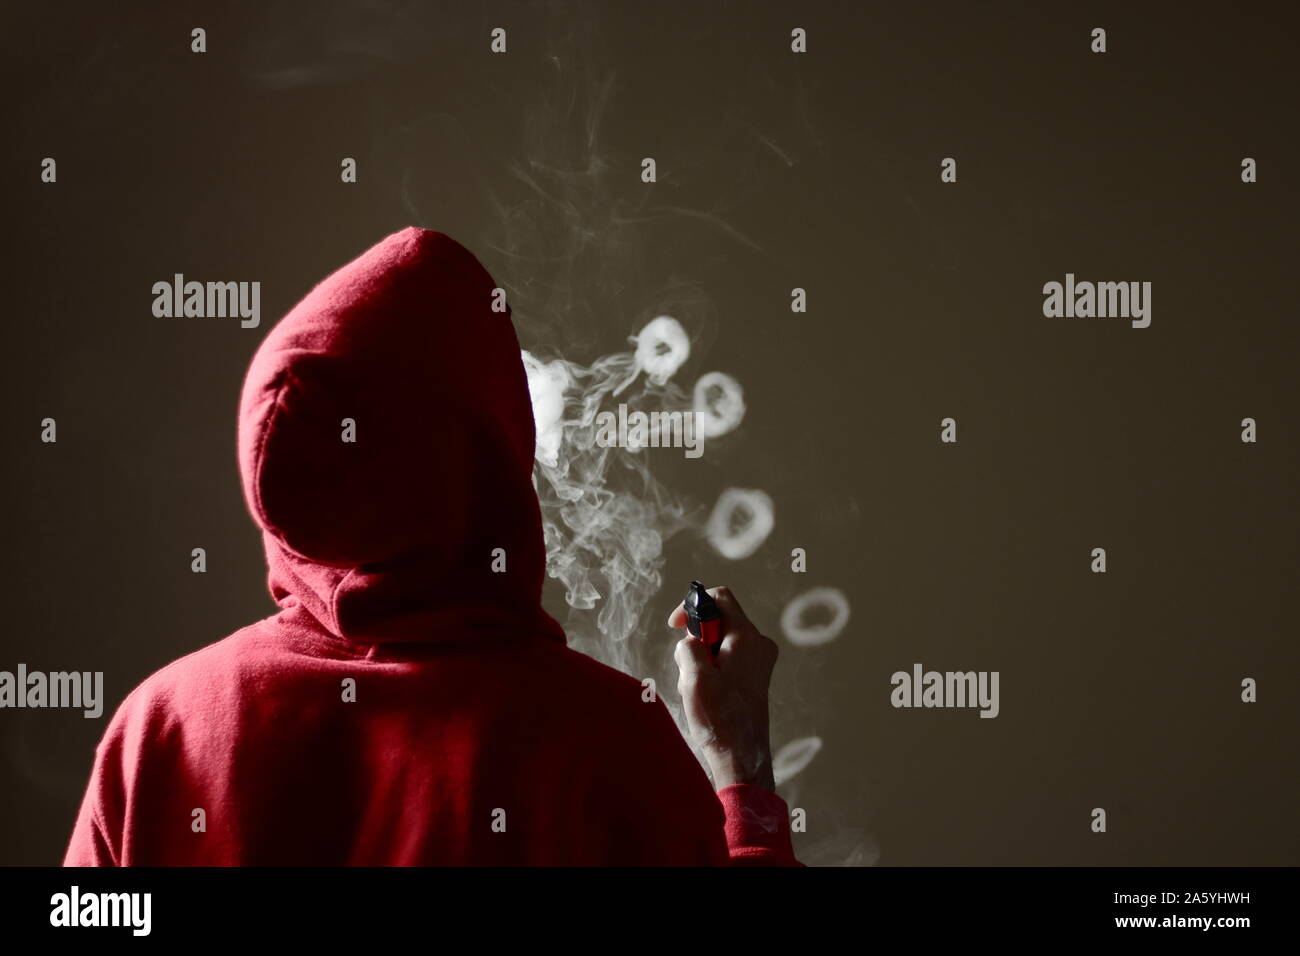 Young male in red hoodie vaping smoking, blows multiple smoke rings while holding a vape in hand, isolated rear view Stock Photo